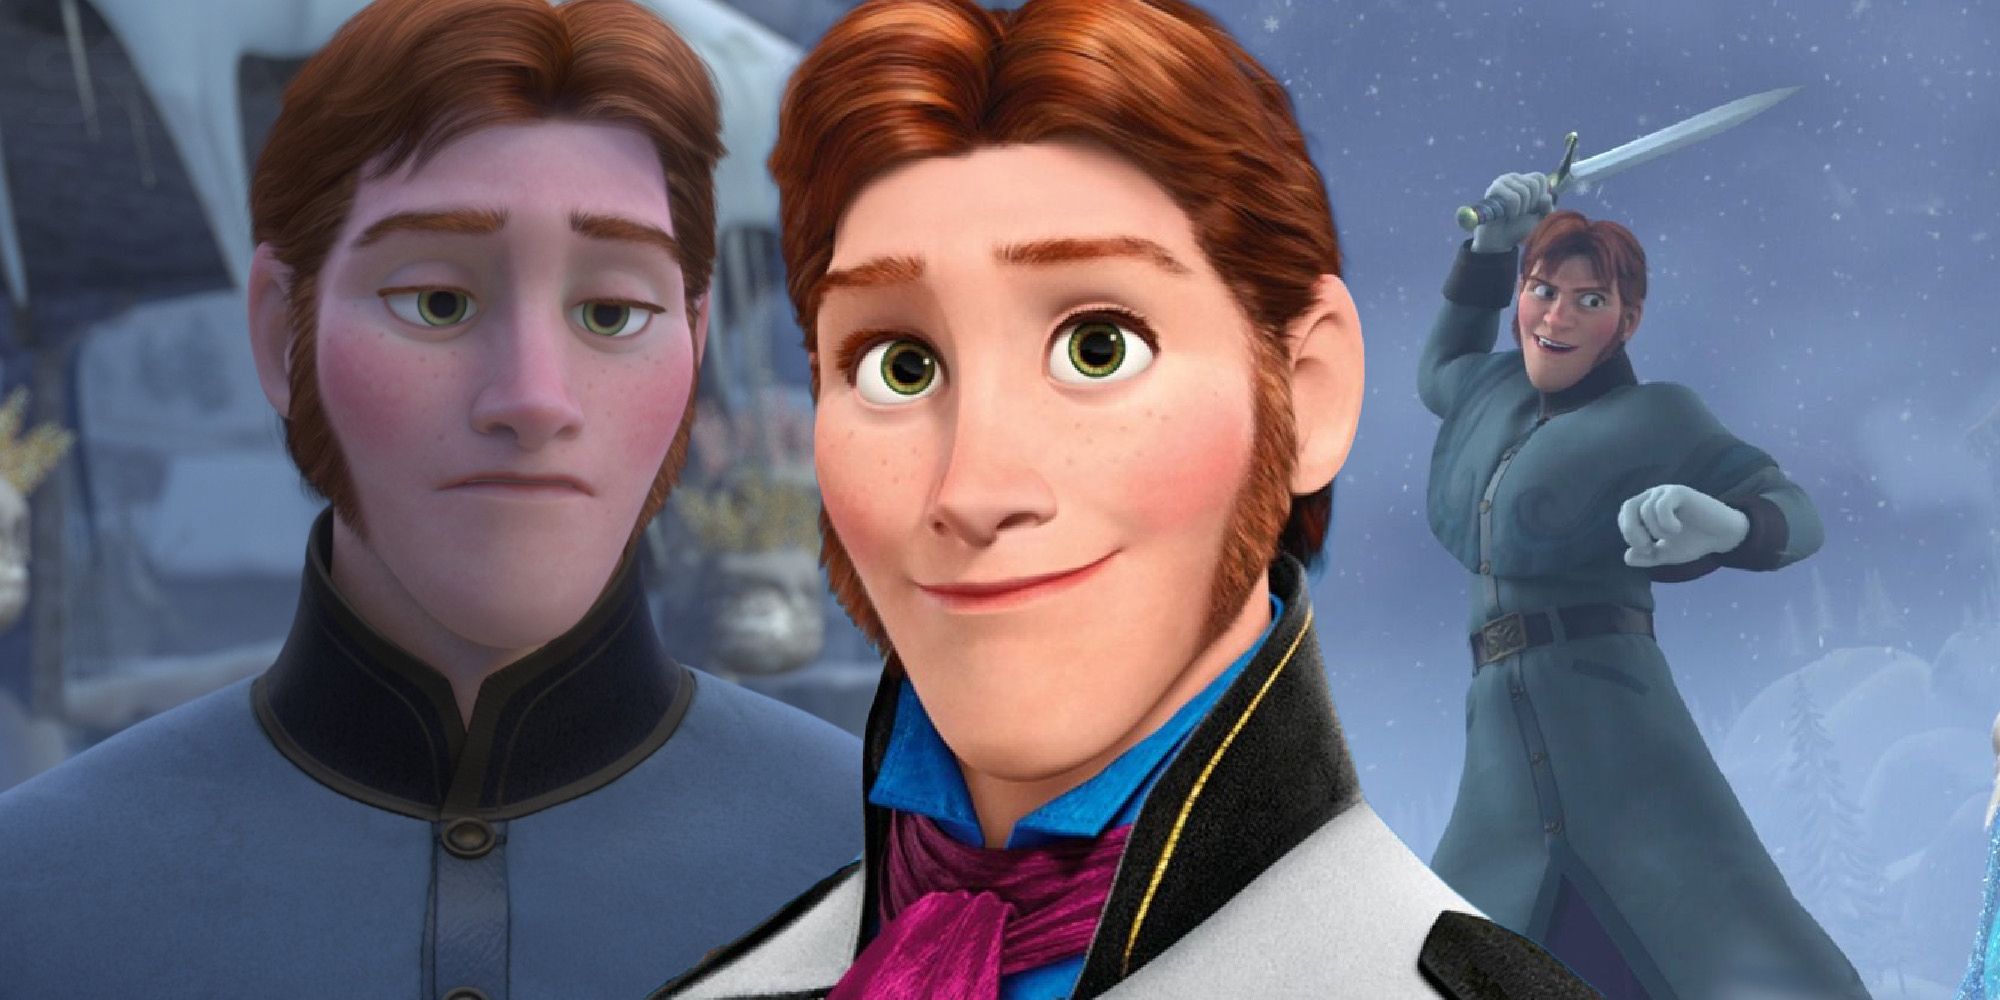 How old is Hans?